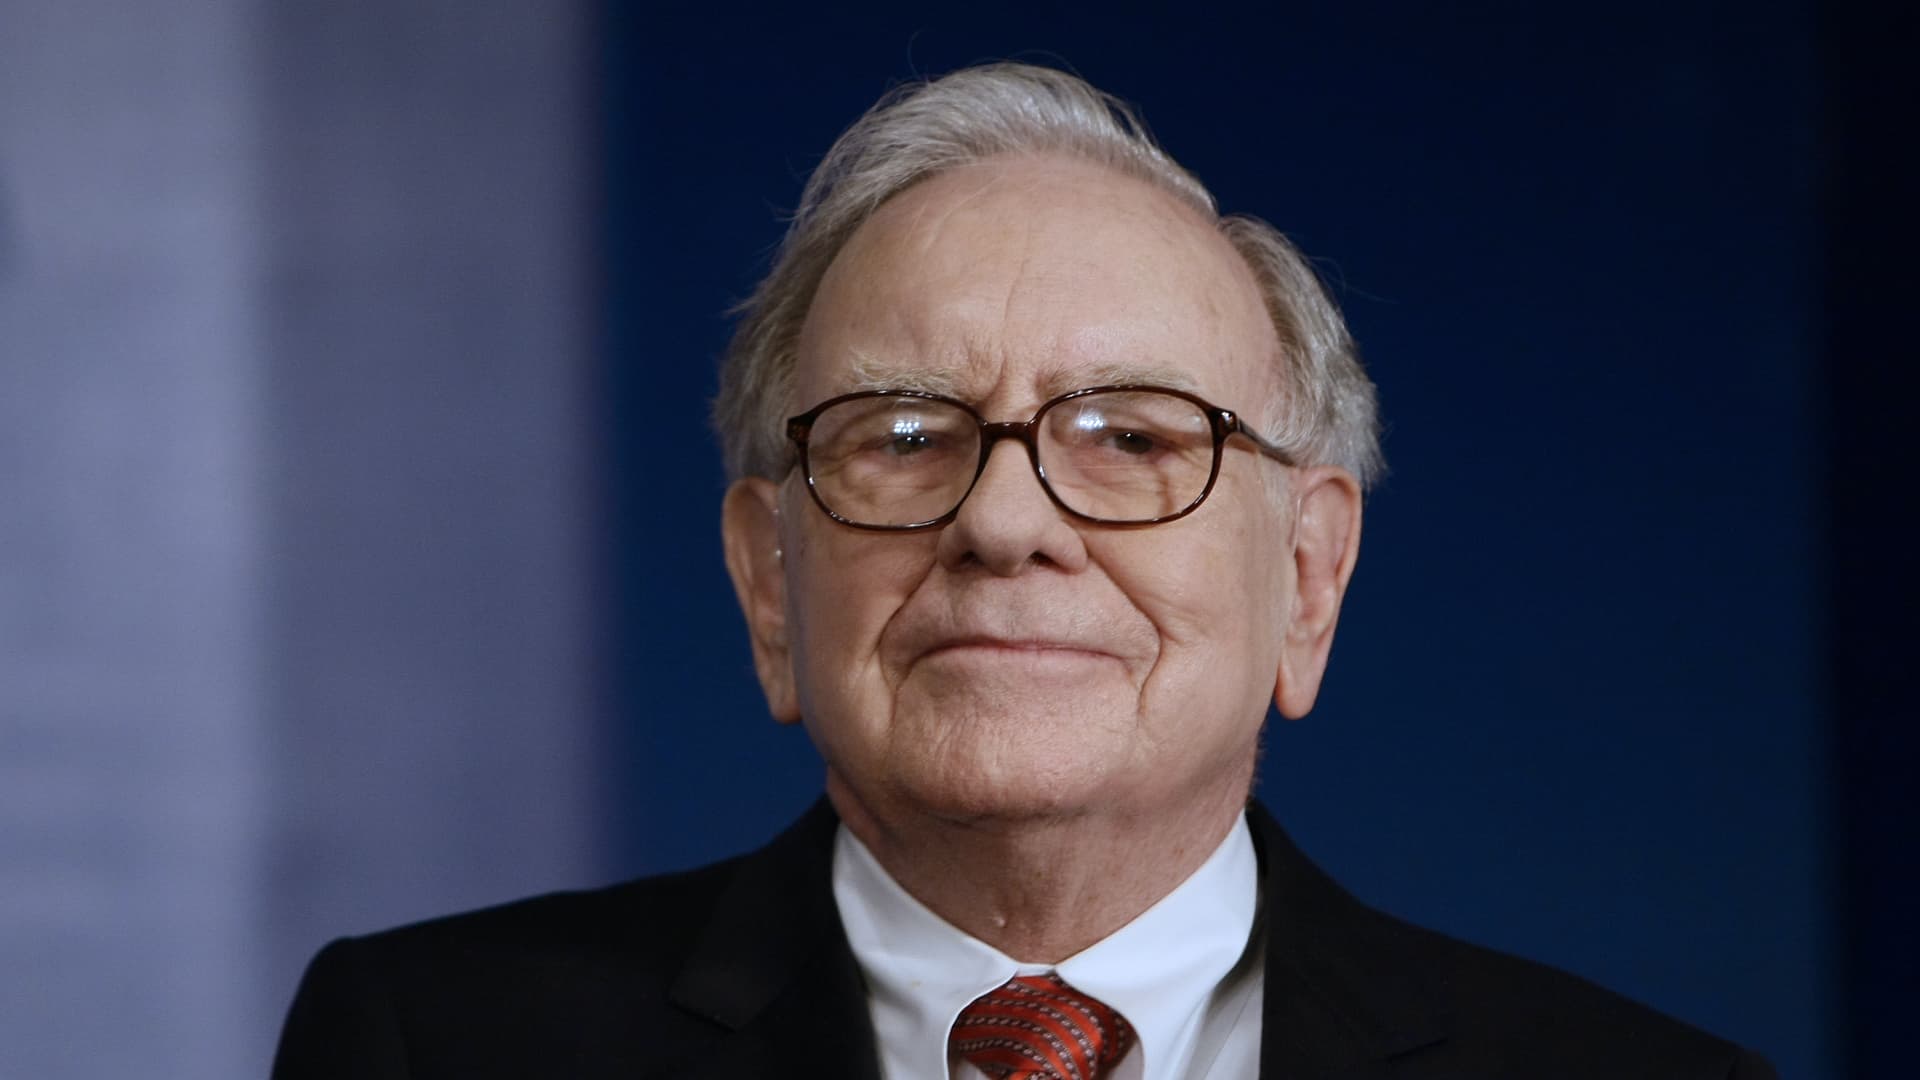 Warren Buffett calls this 'indispensable' life advice: 'You can always tell someone to go to hell tomorrow'